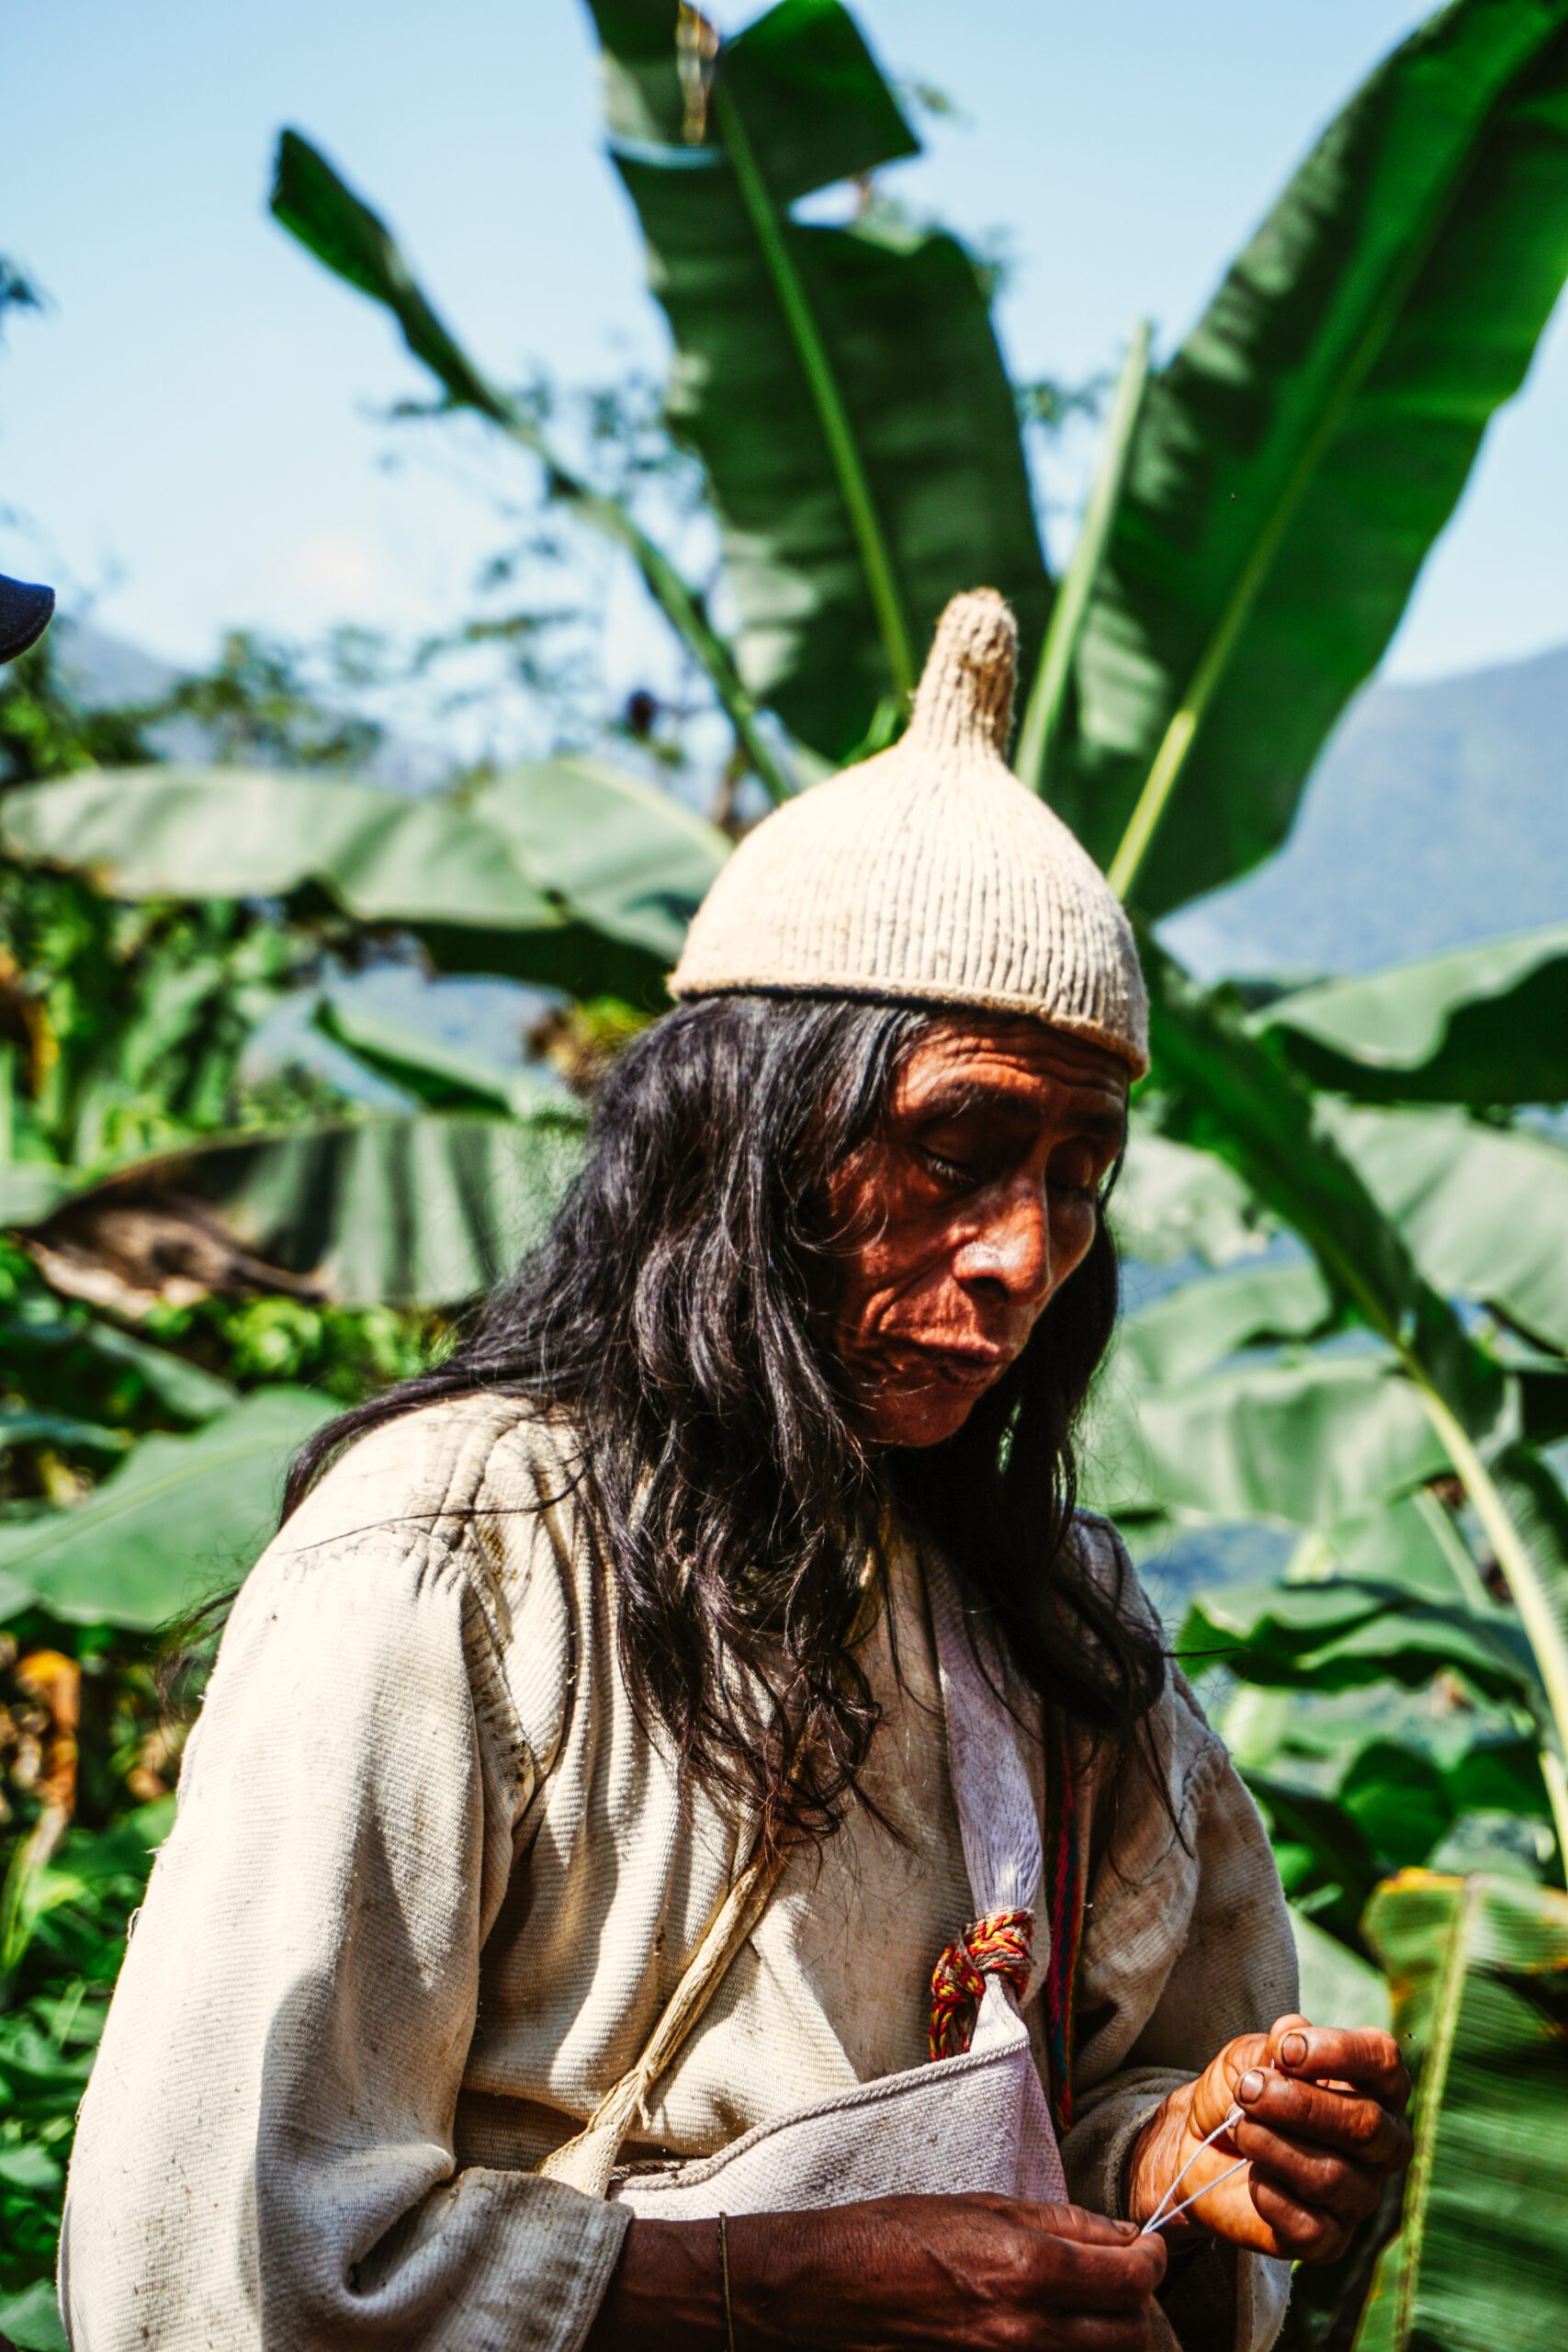 A man from an indigenous community in a banana field. The image illustrates the indigenous people's knowledge of nature.